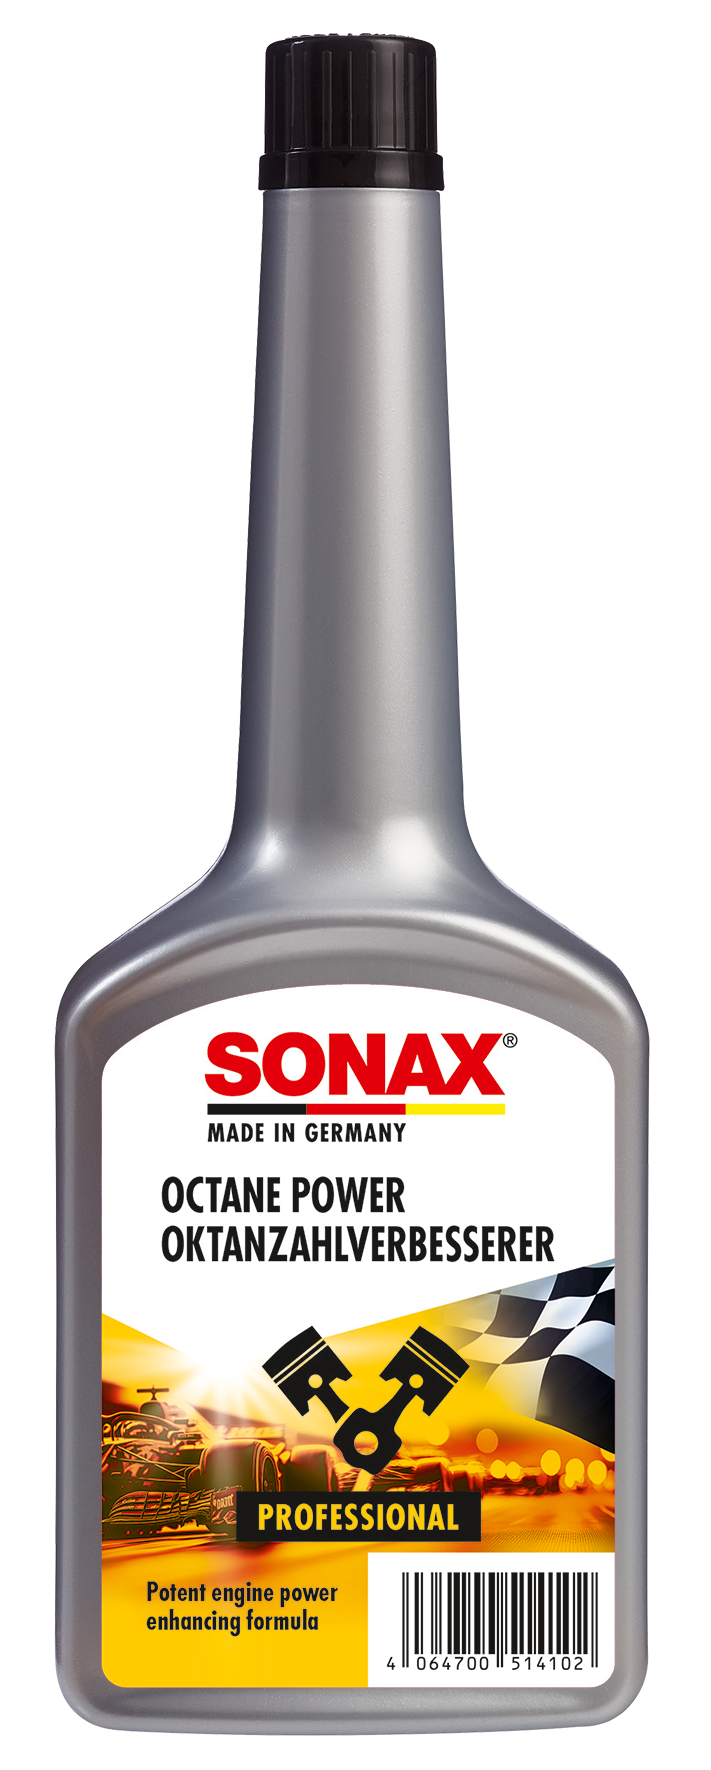 Product image download - SONAX Media - site 4